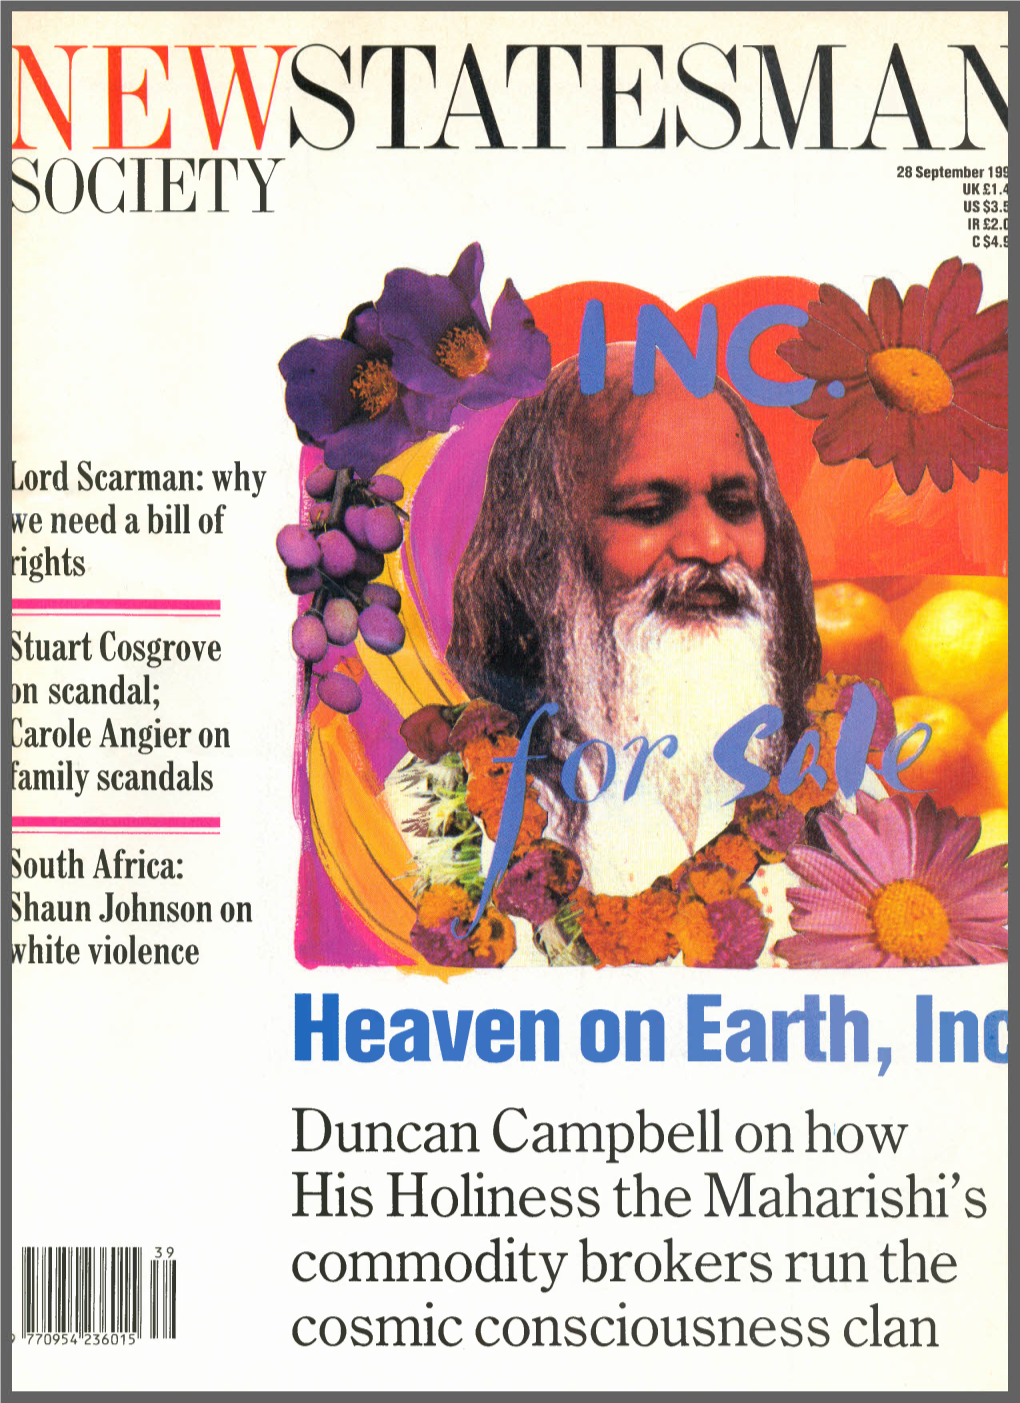 Heaven on Earth, in Duncan Campbell on How His Holiness the Maharishi's 39 Commodity Brokers Run The